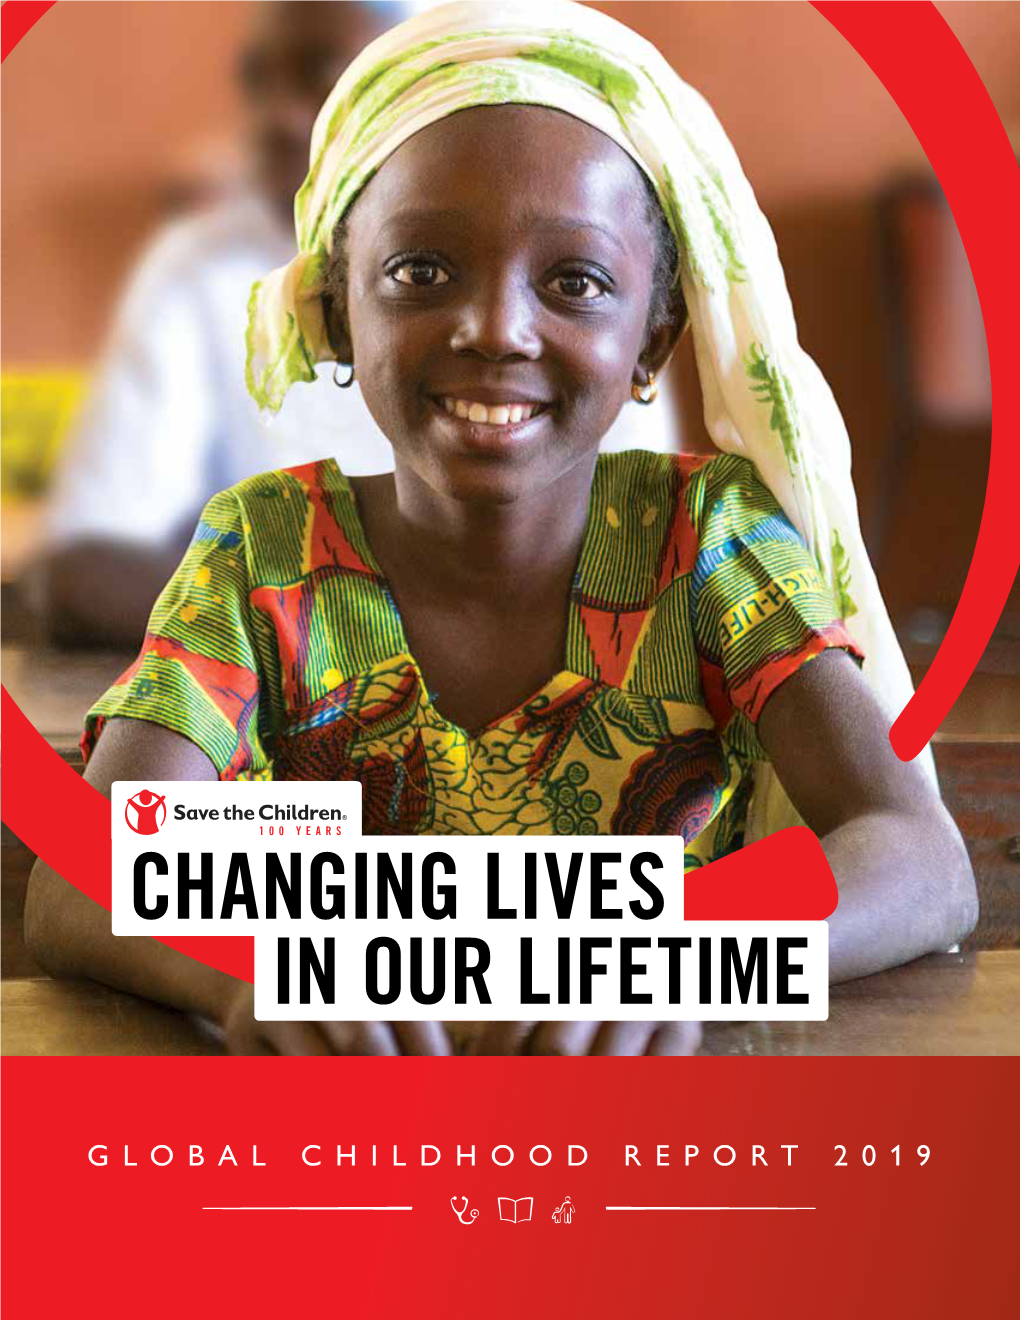 2019 Global Childhood Report: Changing Lives in Our Lifetime